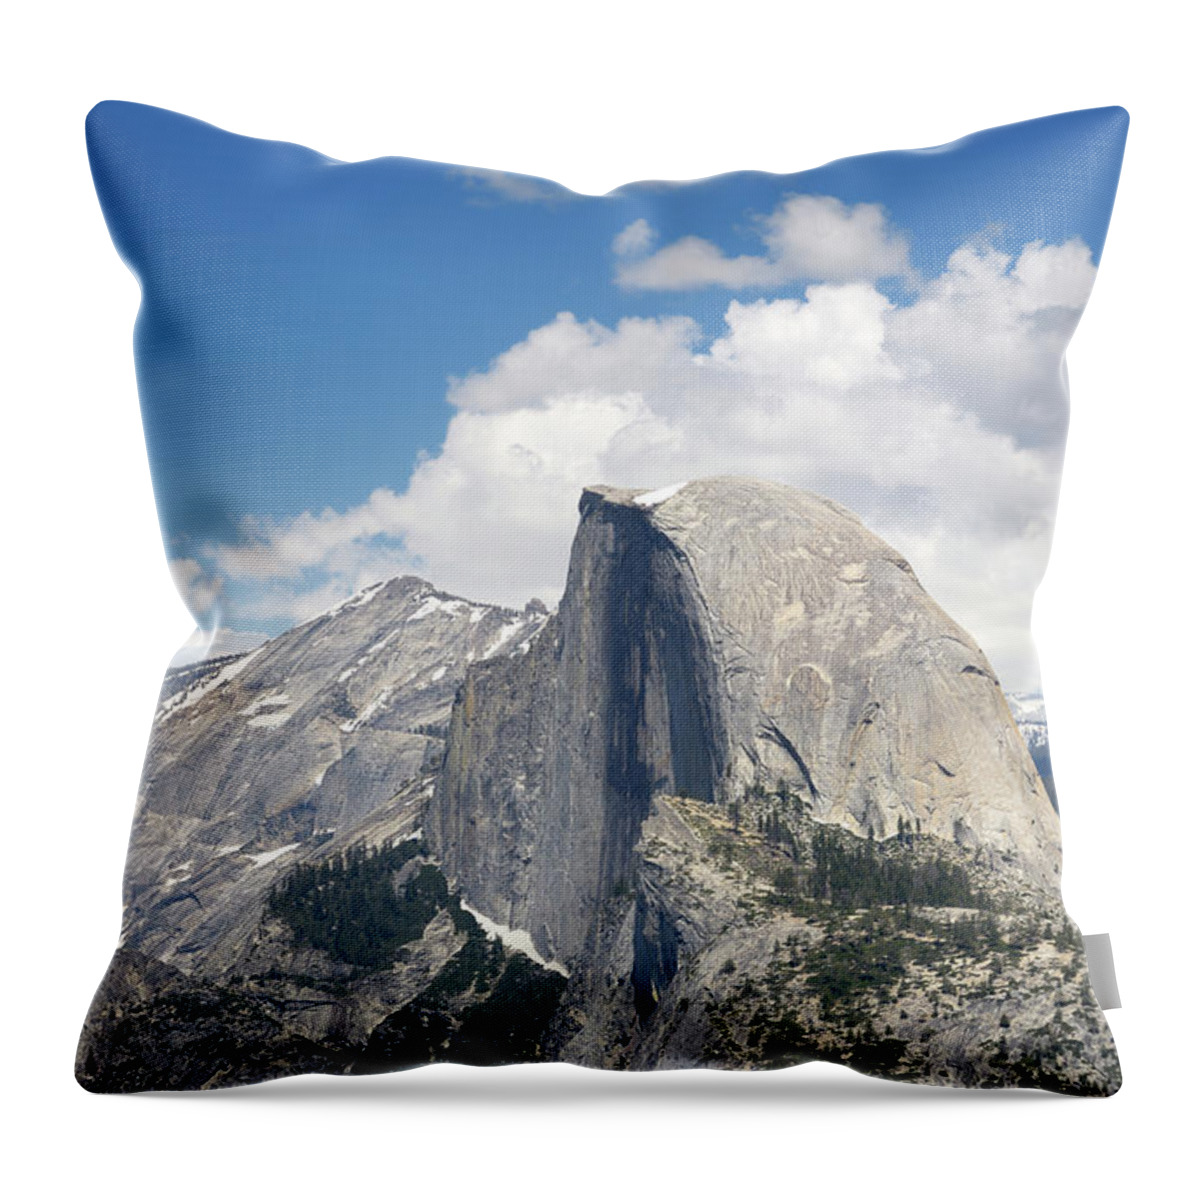 Scenics Throw Pillow featuring the photograph Yosemites Half Dome And Snow Covered by Gomezdavid